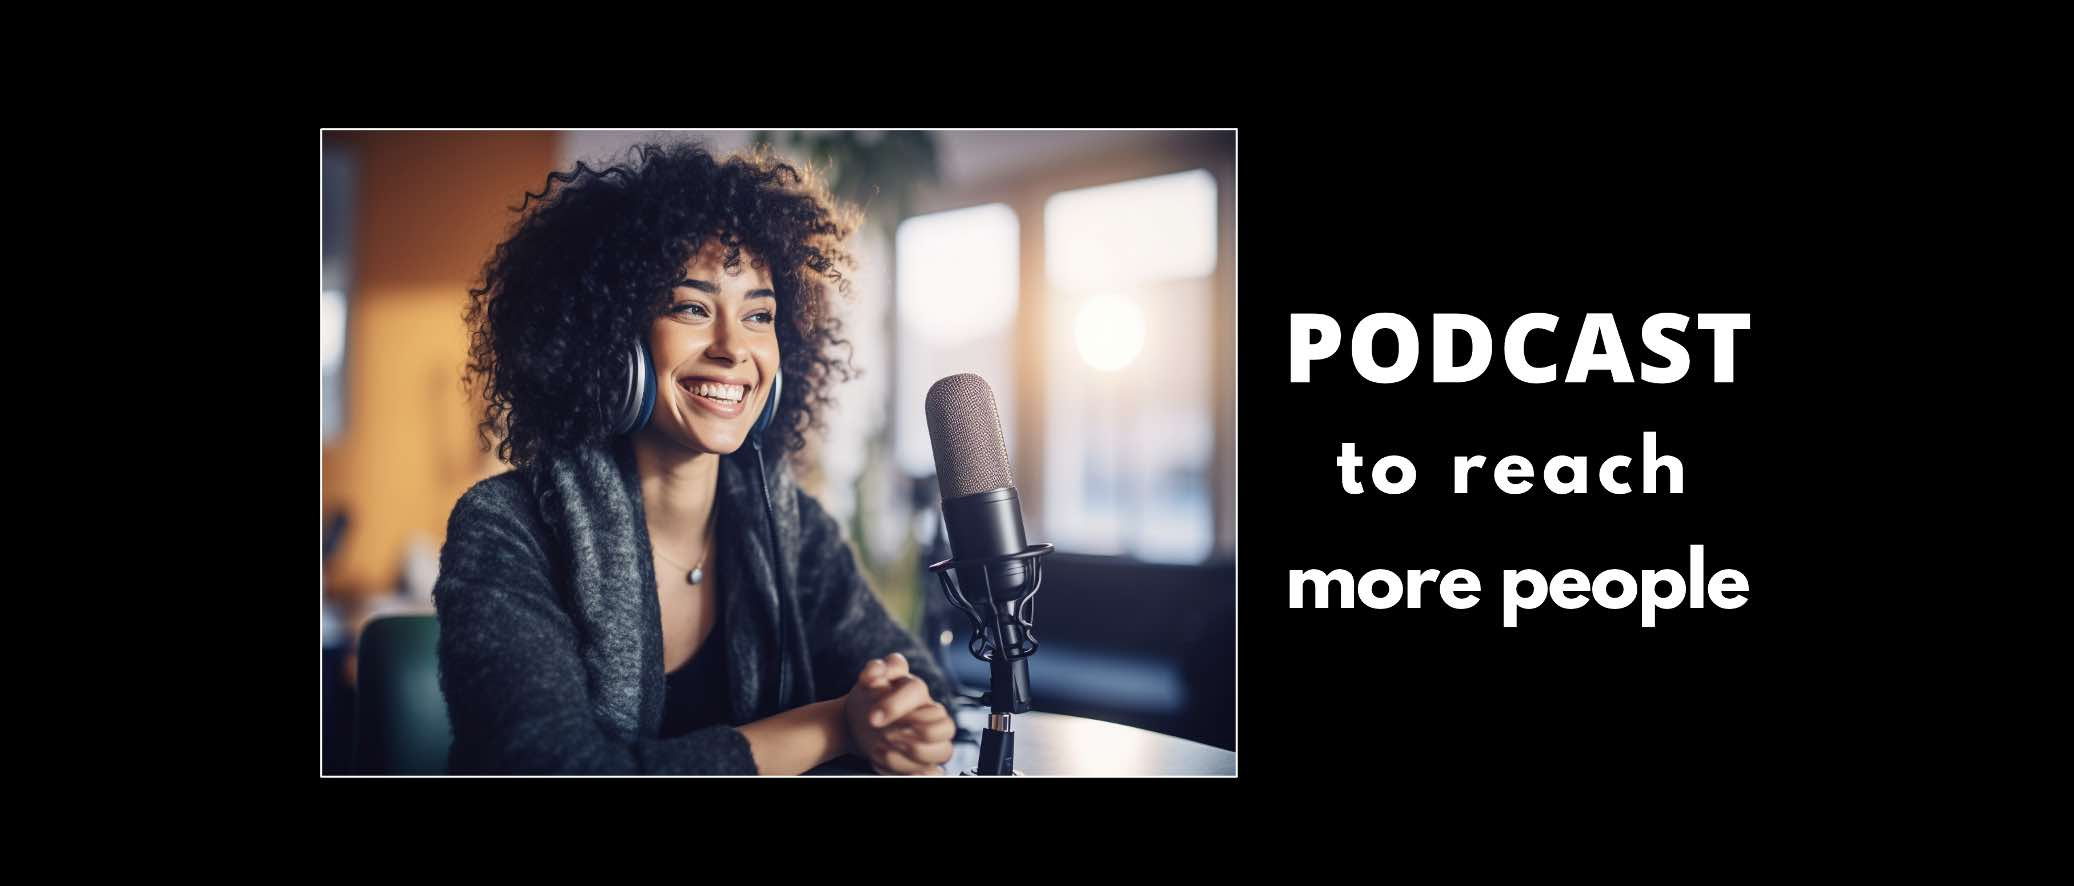 Podcast to reach more people